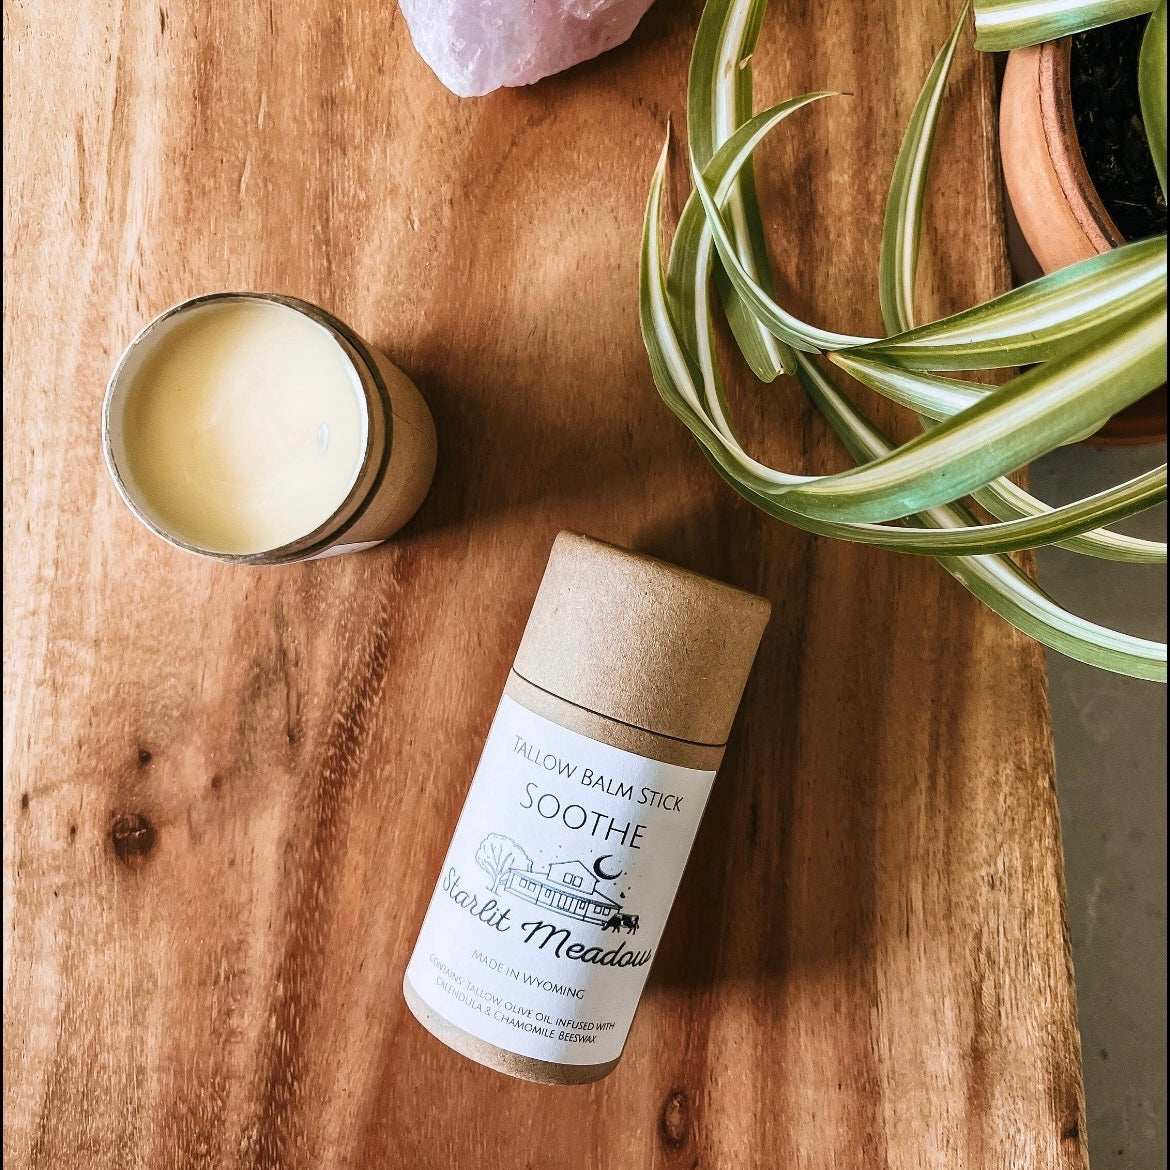 Chamomile &amp; Calendula infused Grass Fed Tallow Balm Stick -Soothe